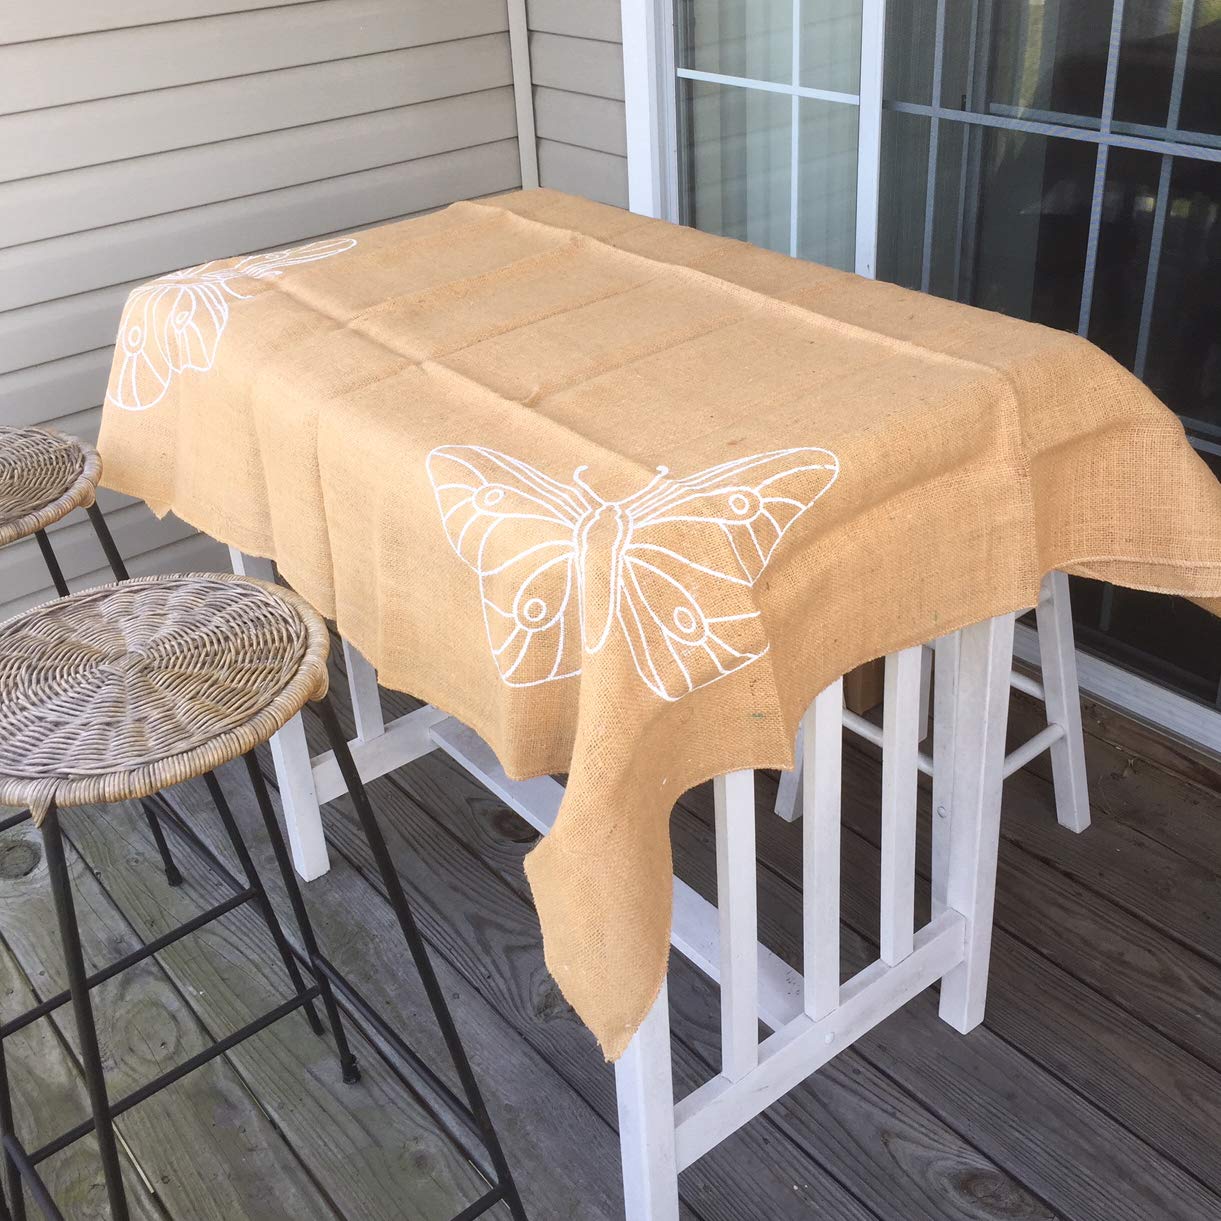 Jute Table Toppers| 45" x 45 inch Burlap Table Cover | Butterfly Burlap Rustic Table Runner Wedding Decoration